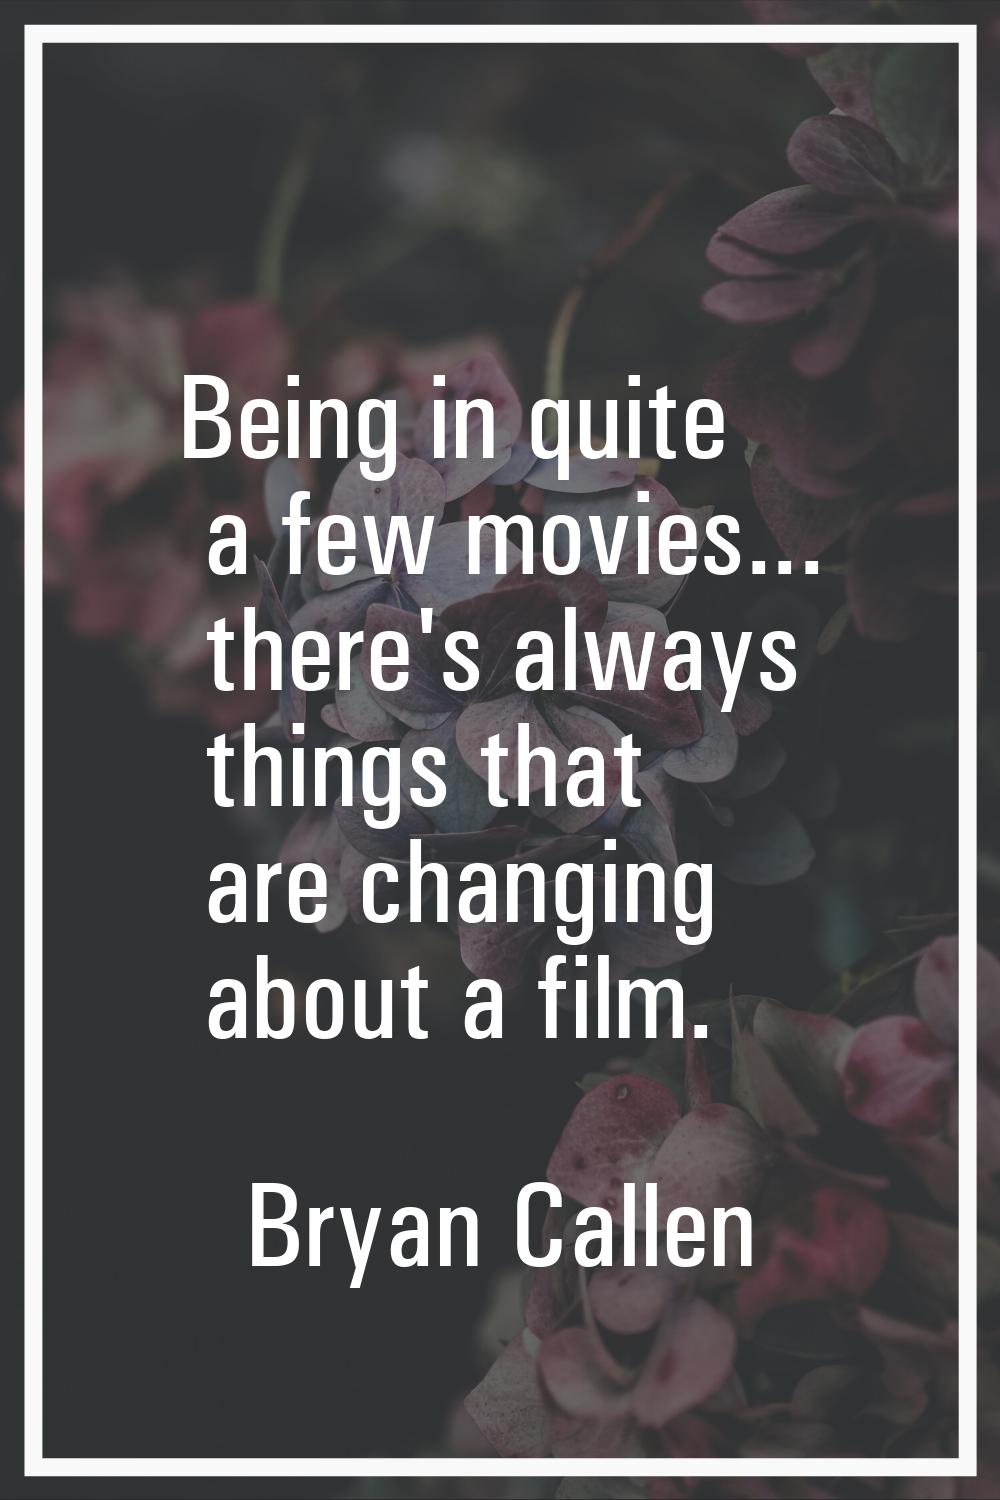 Being in quite a few movies... there's always things that are changing about a film.